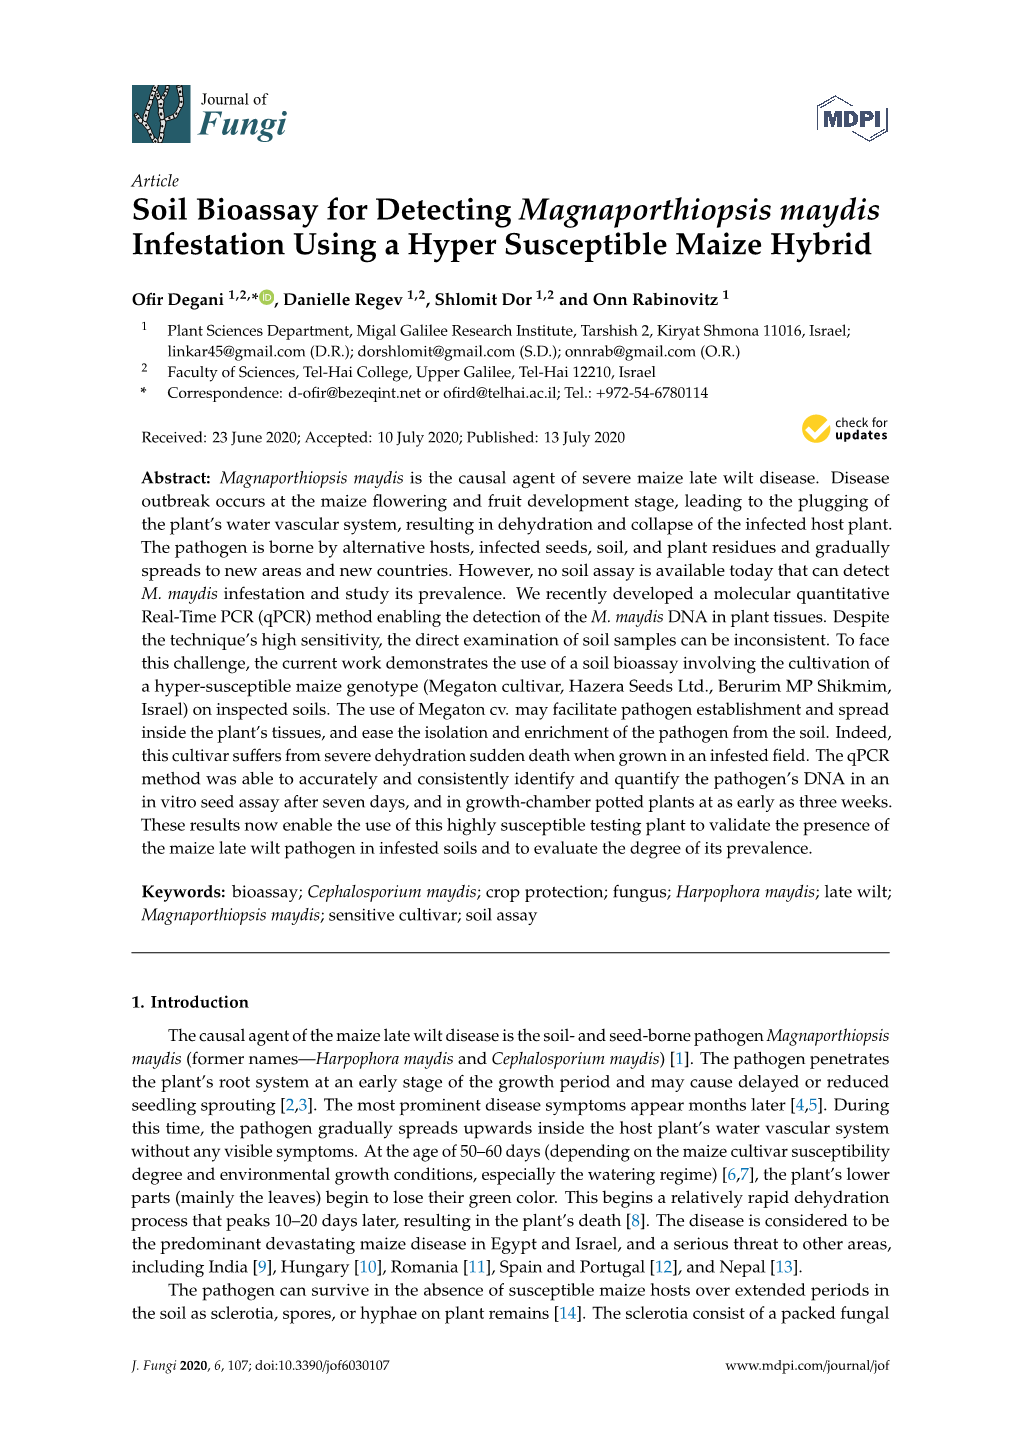 Soil Bioassay for Detecting Magnaporthiopsis Maydis Infestation Using a Hyper Susceptible Maize Hybrid